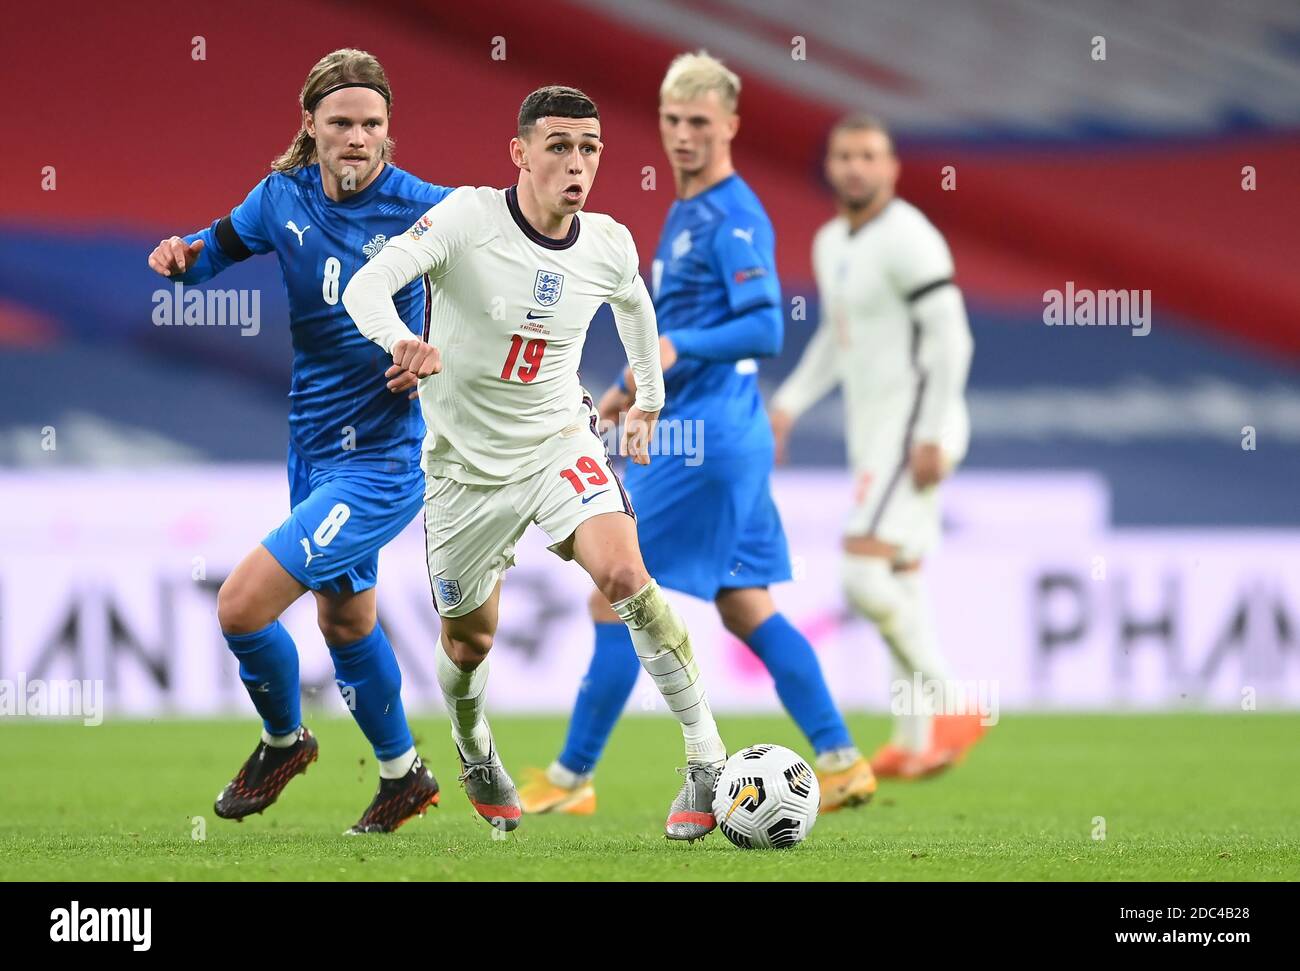 Iceland's Birkir Bjarnason (left) and England's Phil Foden in action during the UEFA Nations League match at Wembley Stadium, London. Stock Photo